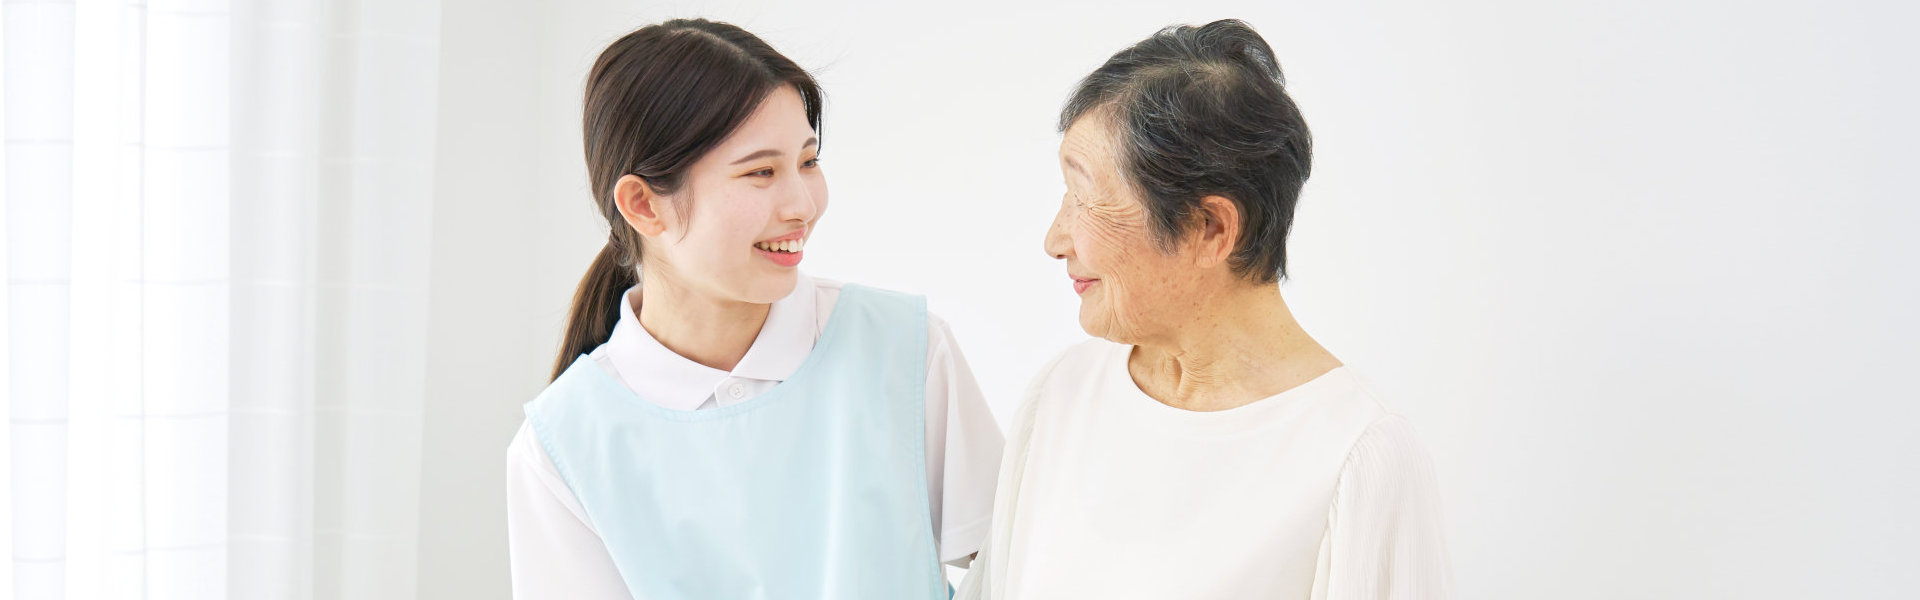 caregiver and her patient smiling